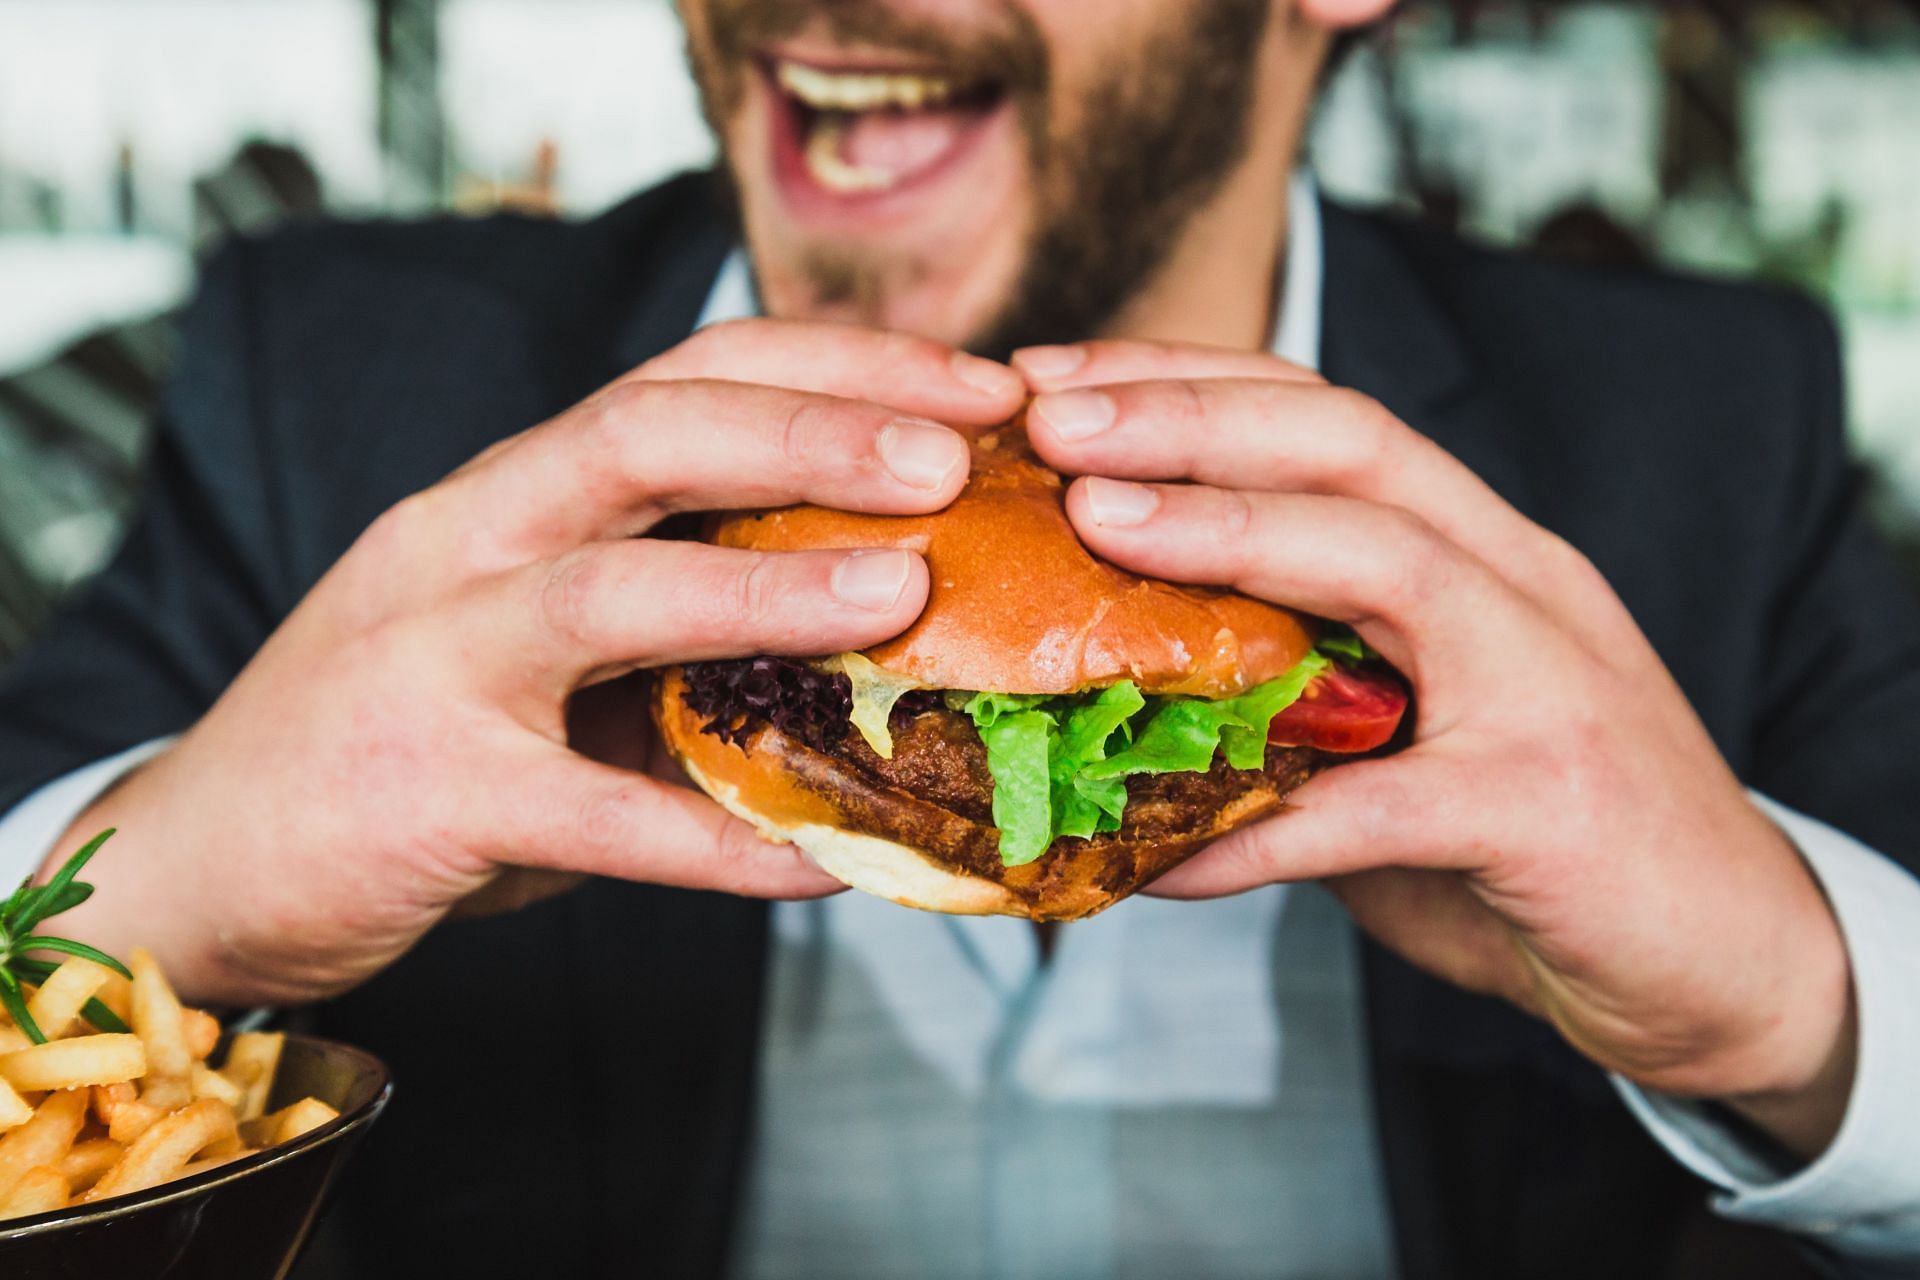 Cheat meals tends to help psychological well-being more than any other thing. (Image via Unsplash/Sander Dalhuisen)